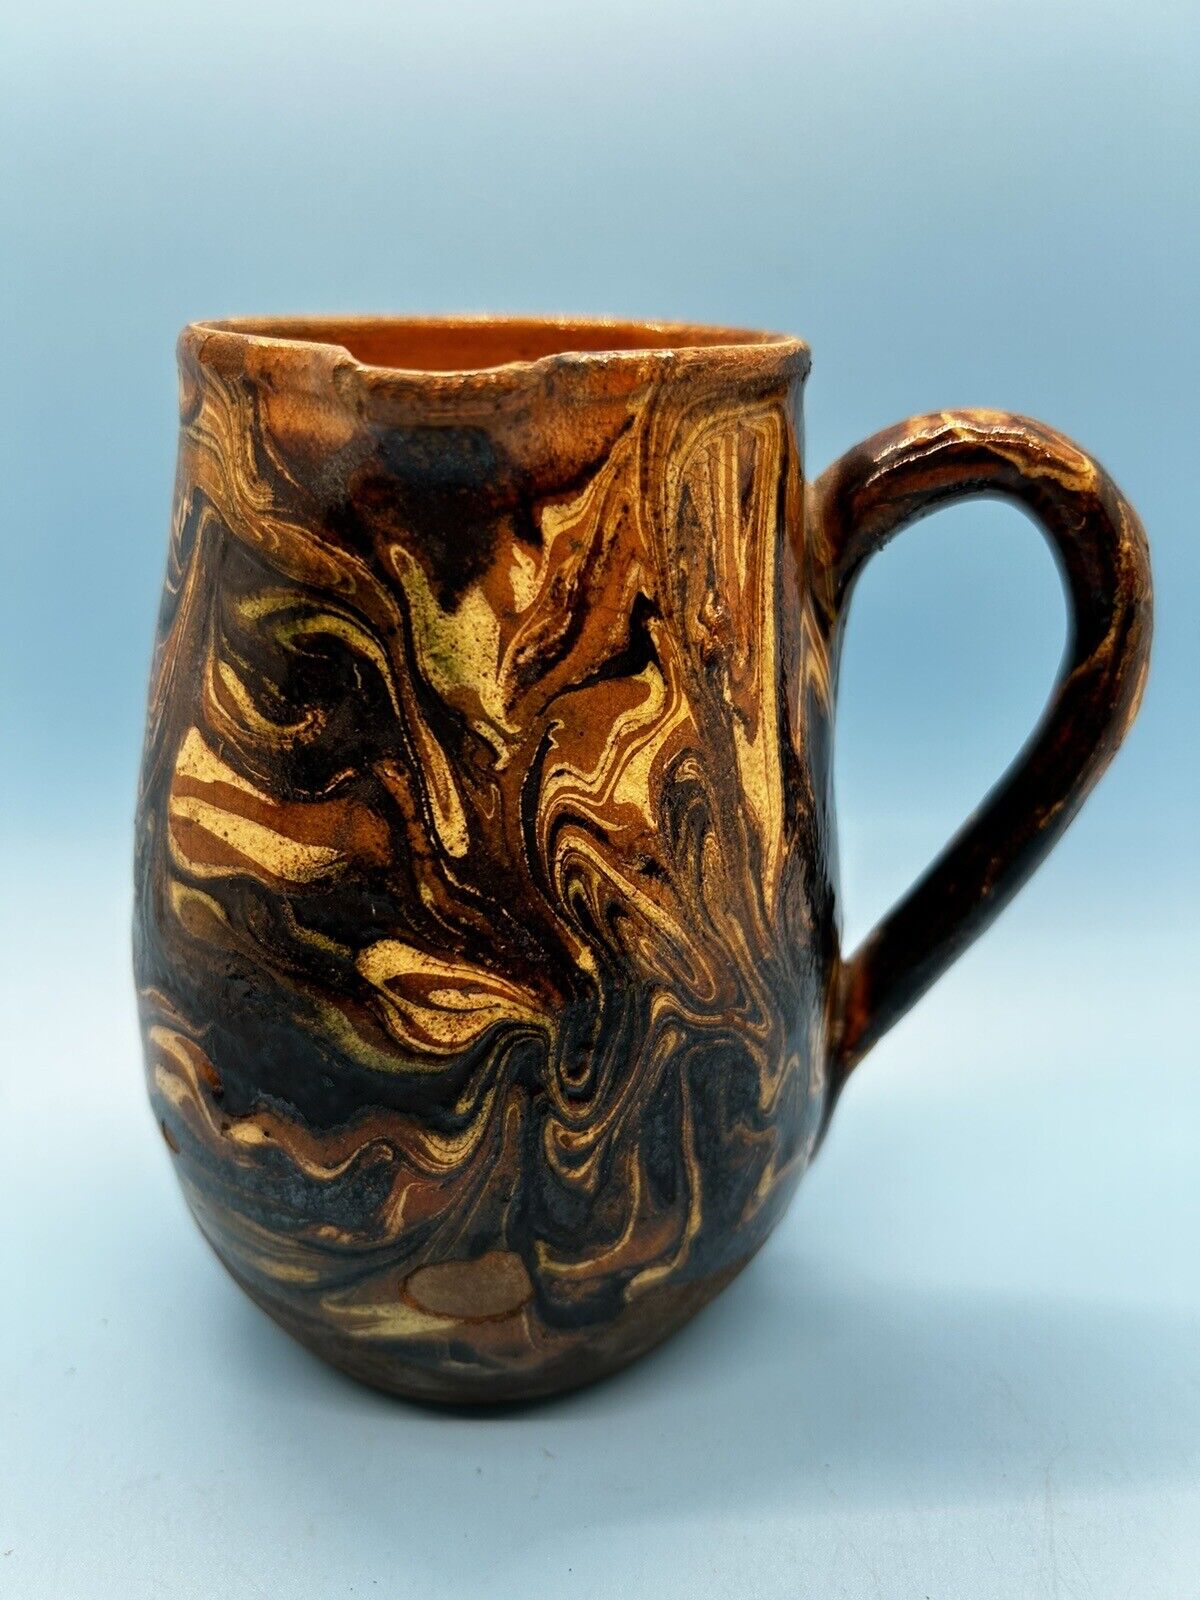 Rare Antique Mocha Ware Marbled Jug Pitcher Purportedly From The Late 1700’s